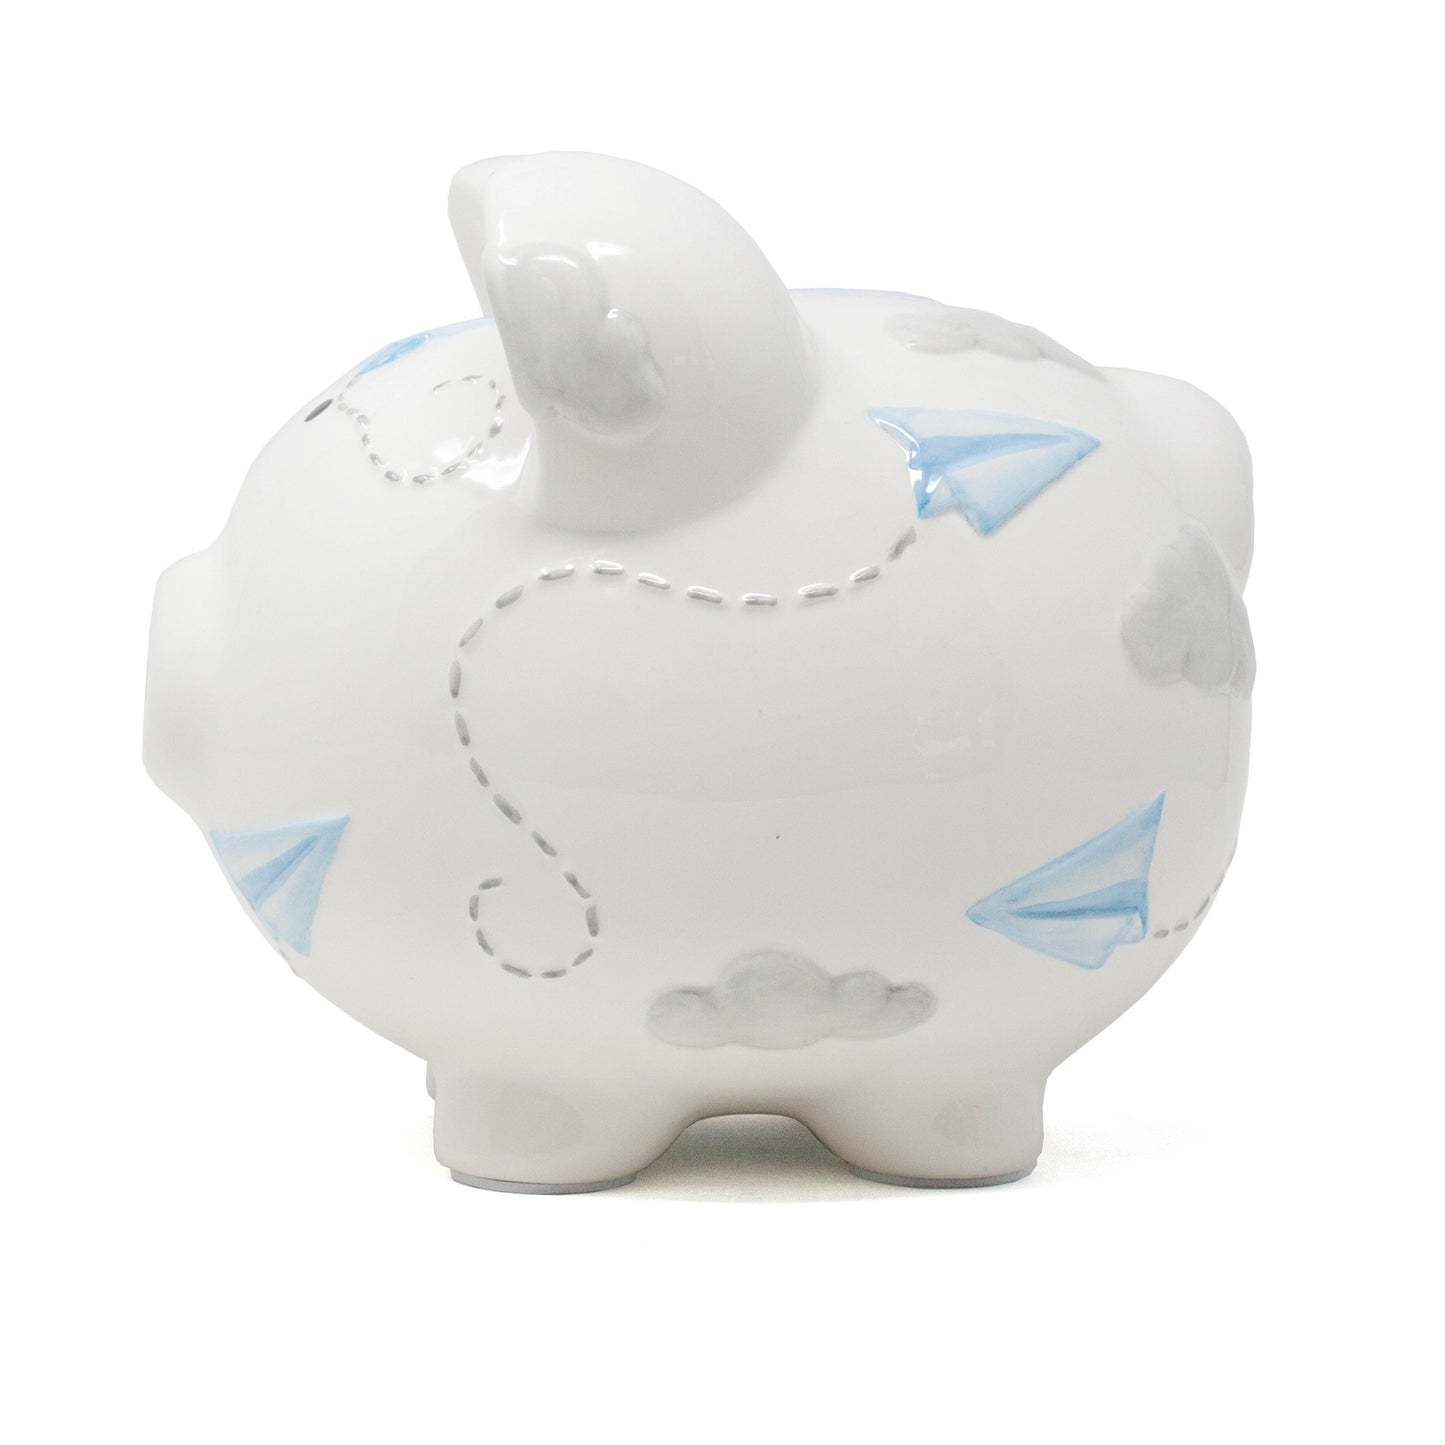 Paper Airplanes Piggy Bank